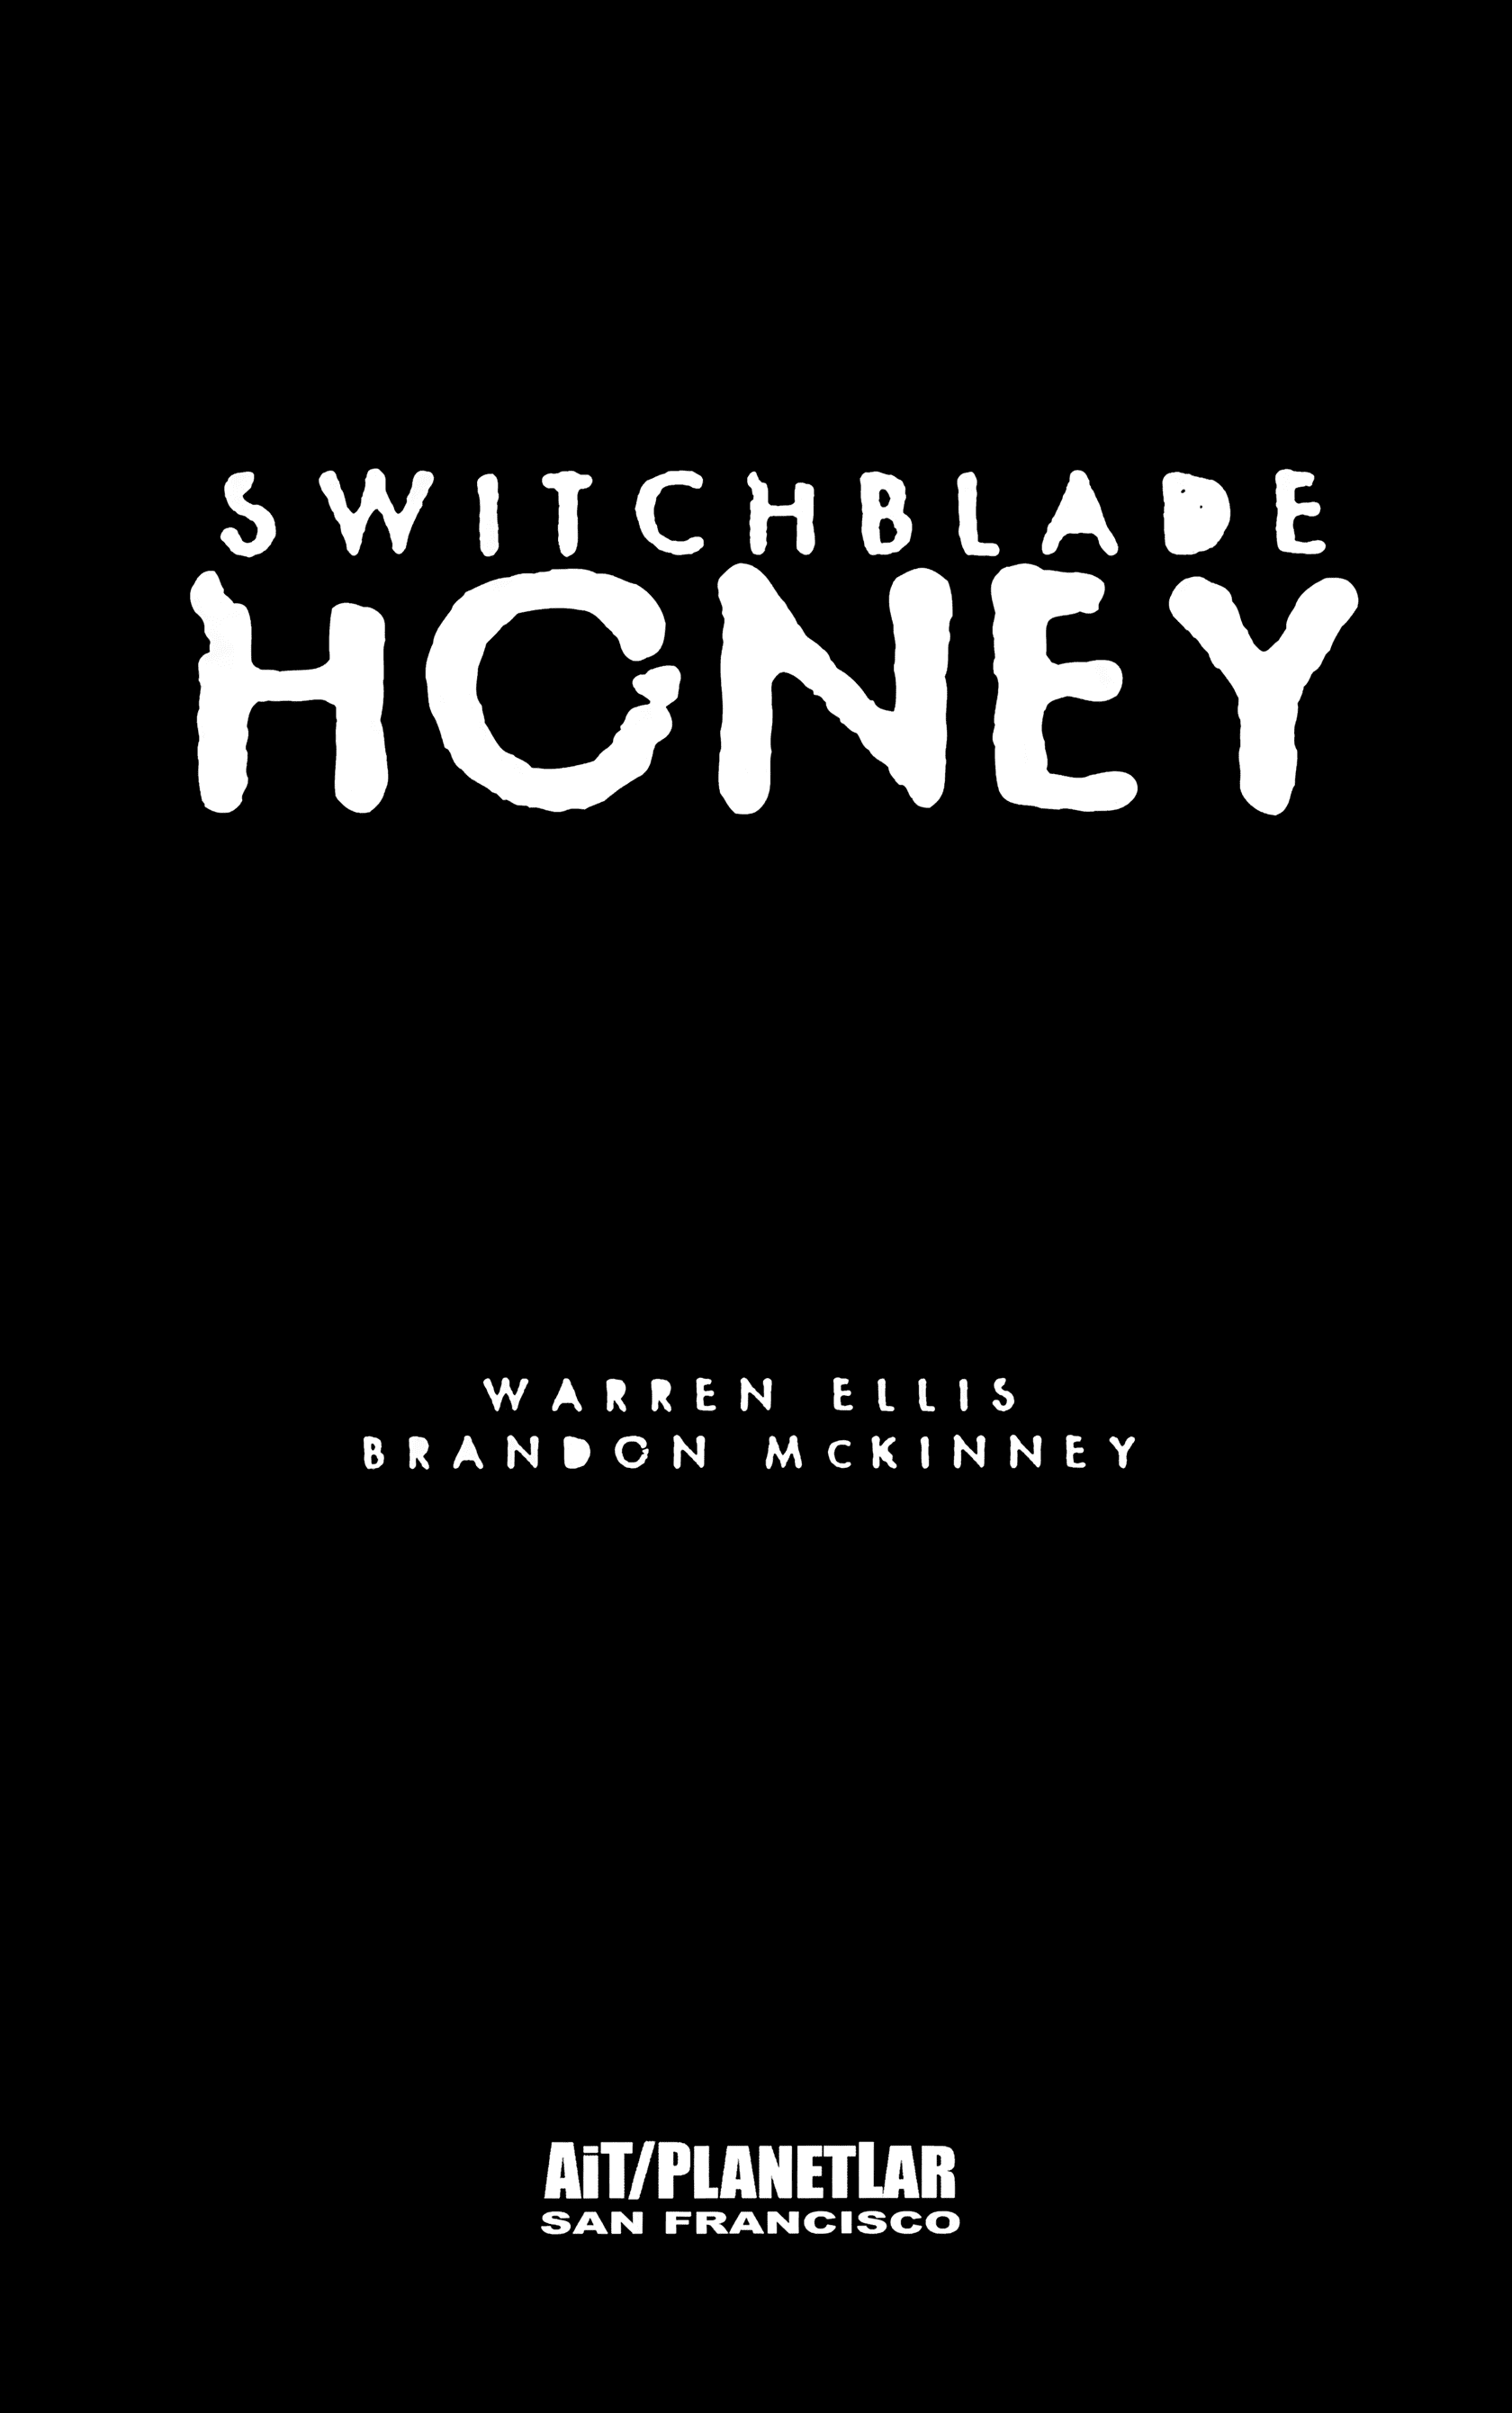 Read online Switchblade Honey comic -  Issue # TPB - 3